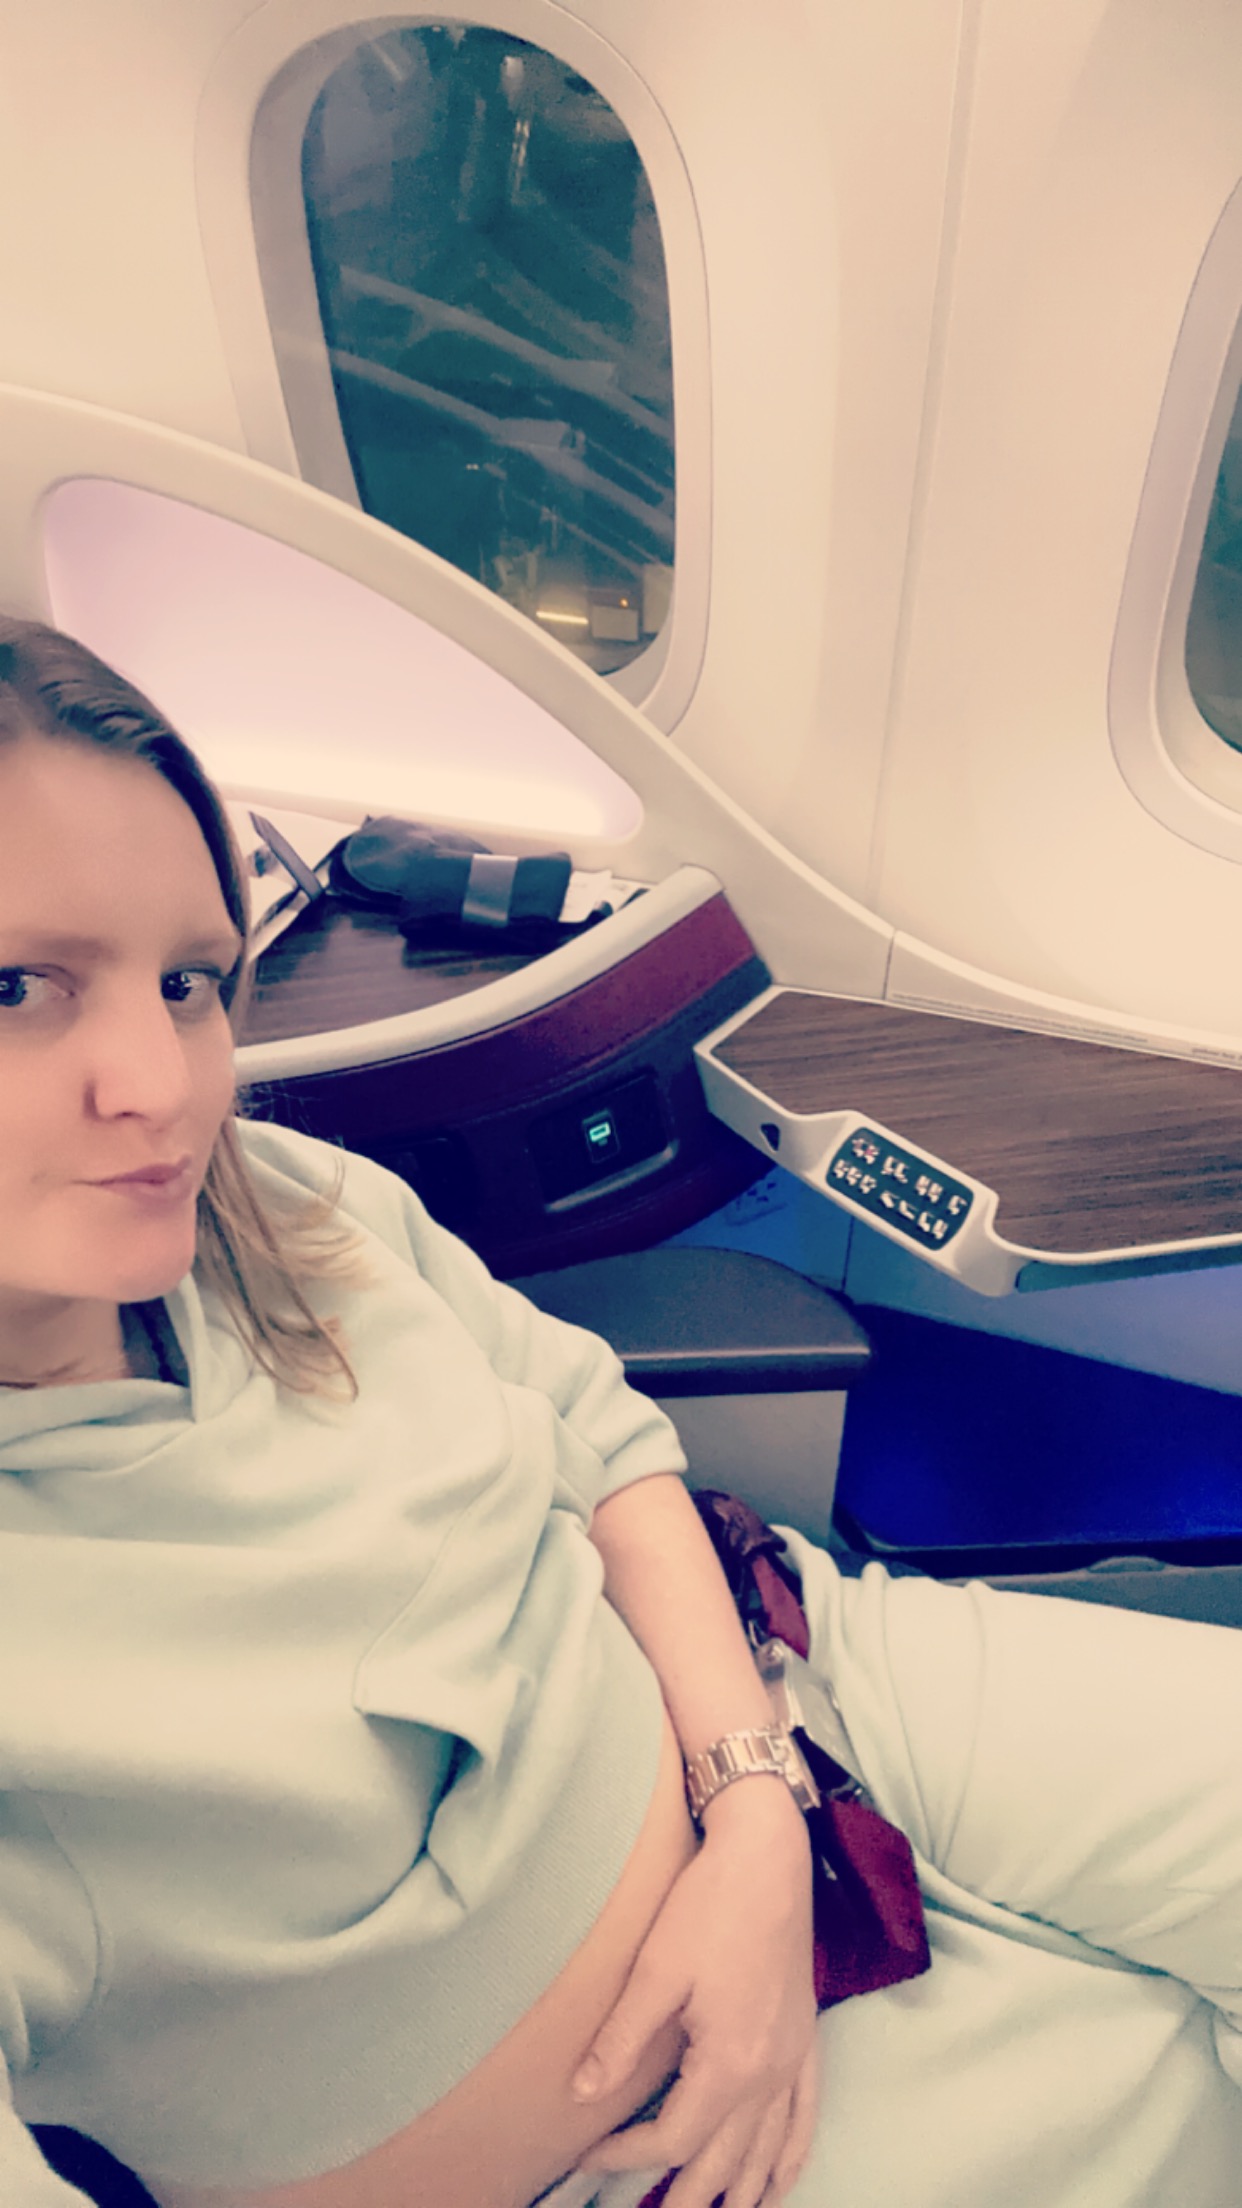 REVIEWED: Qatar Airways Business Class – Is It Worth The Money?